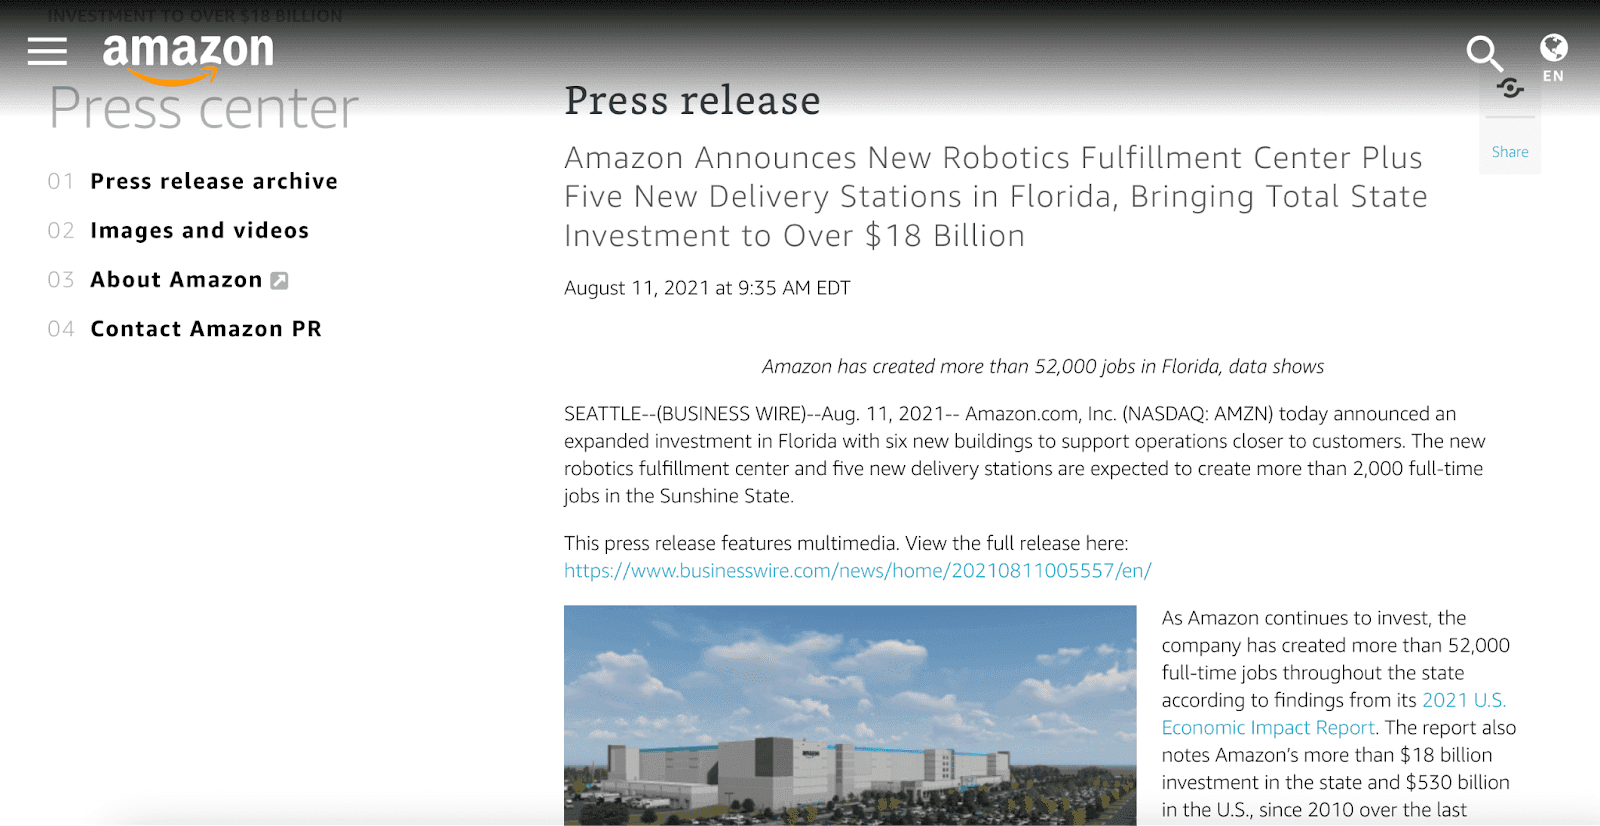 Amazon announces a grand opening of a new fulfillment center in Florida 